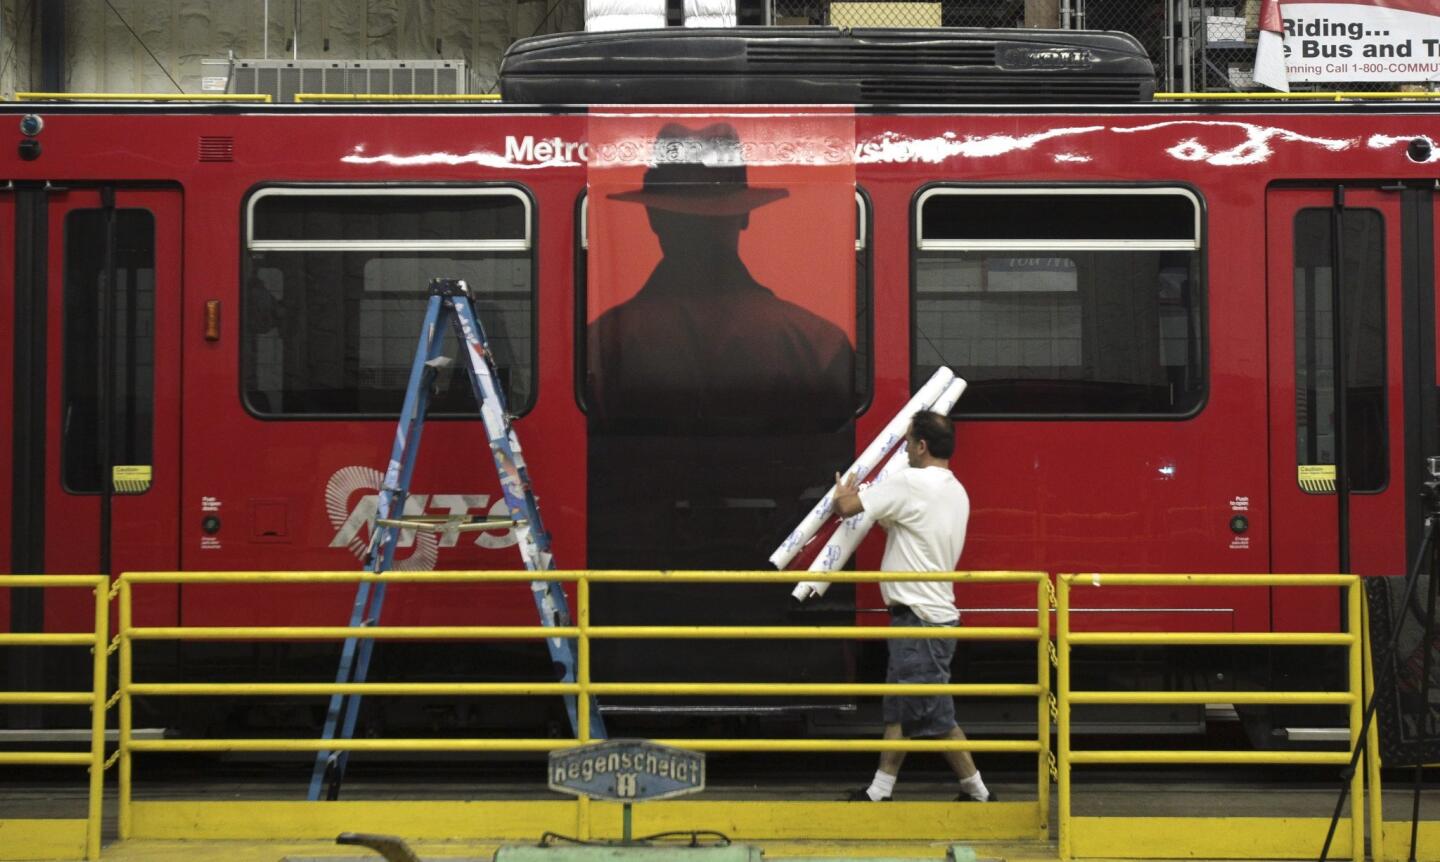 Farzad Parvizi, of Pixel imaging Media, carries rolls of self adhesive transit vinyl as he wraps a trolley car with an advertising wrap for "The Exorcist" television show, part of the fall lineup for the FOX network.